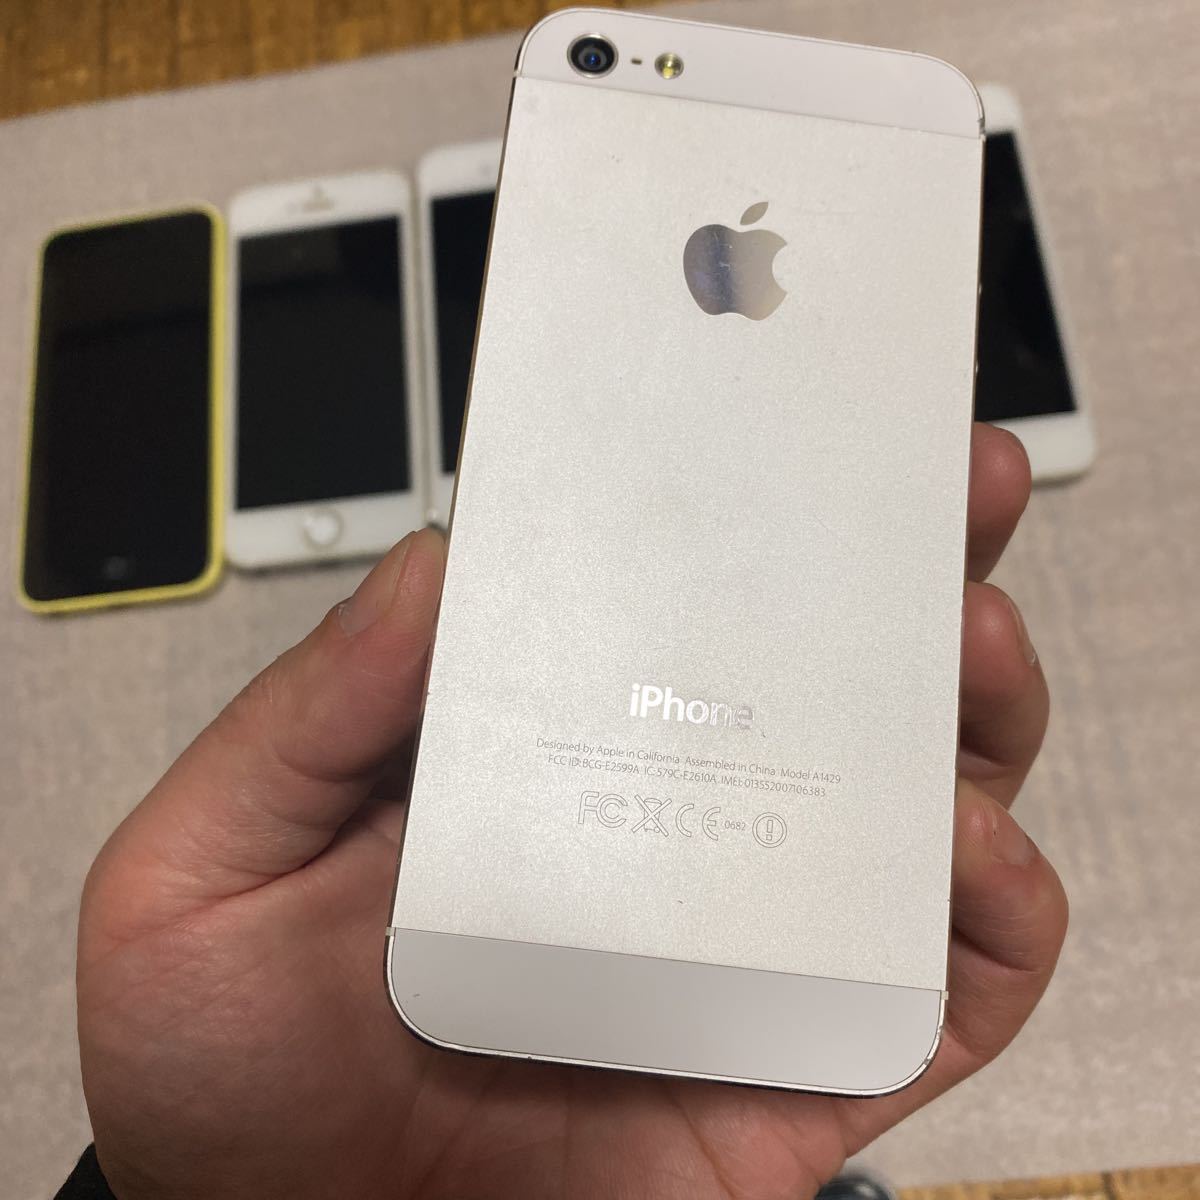 Apple iPhone 本体　iphone6 A1586, iphone SE A1723,A1429,A1453 等　大量　計10点 まとめて　まとめ　ジャンク品　①_画像7